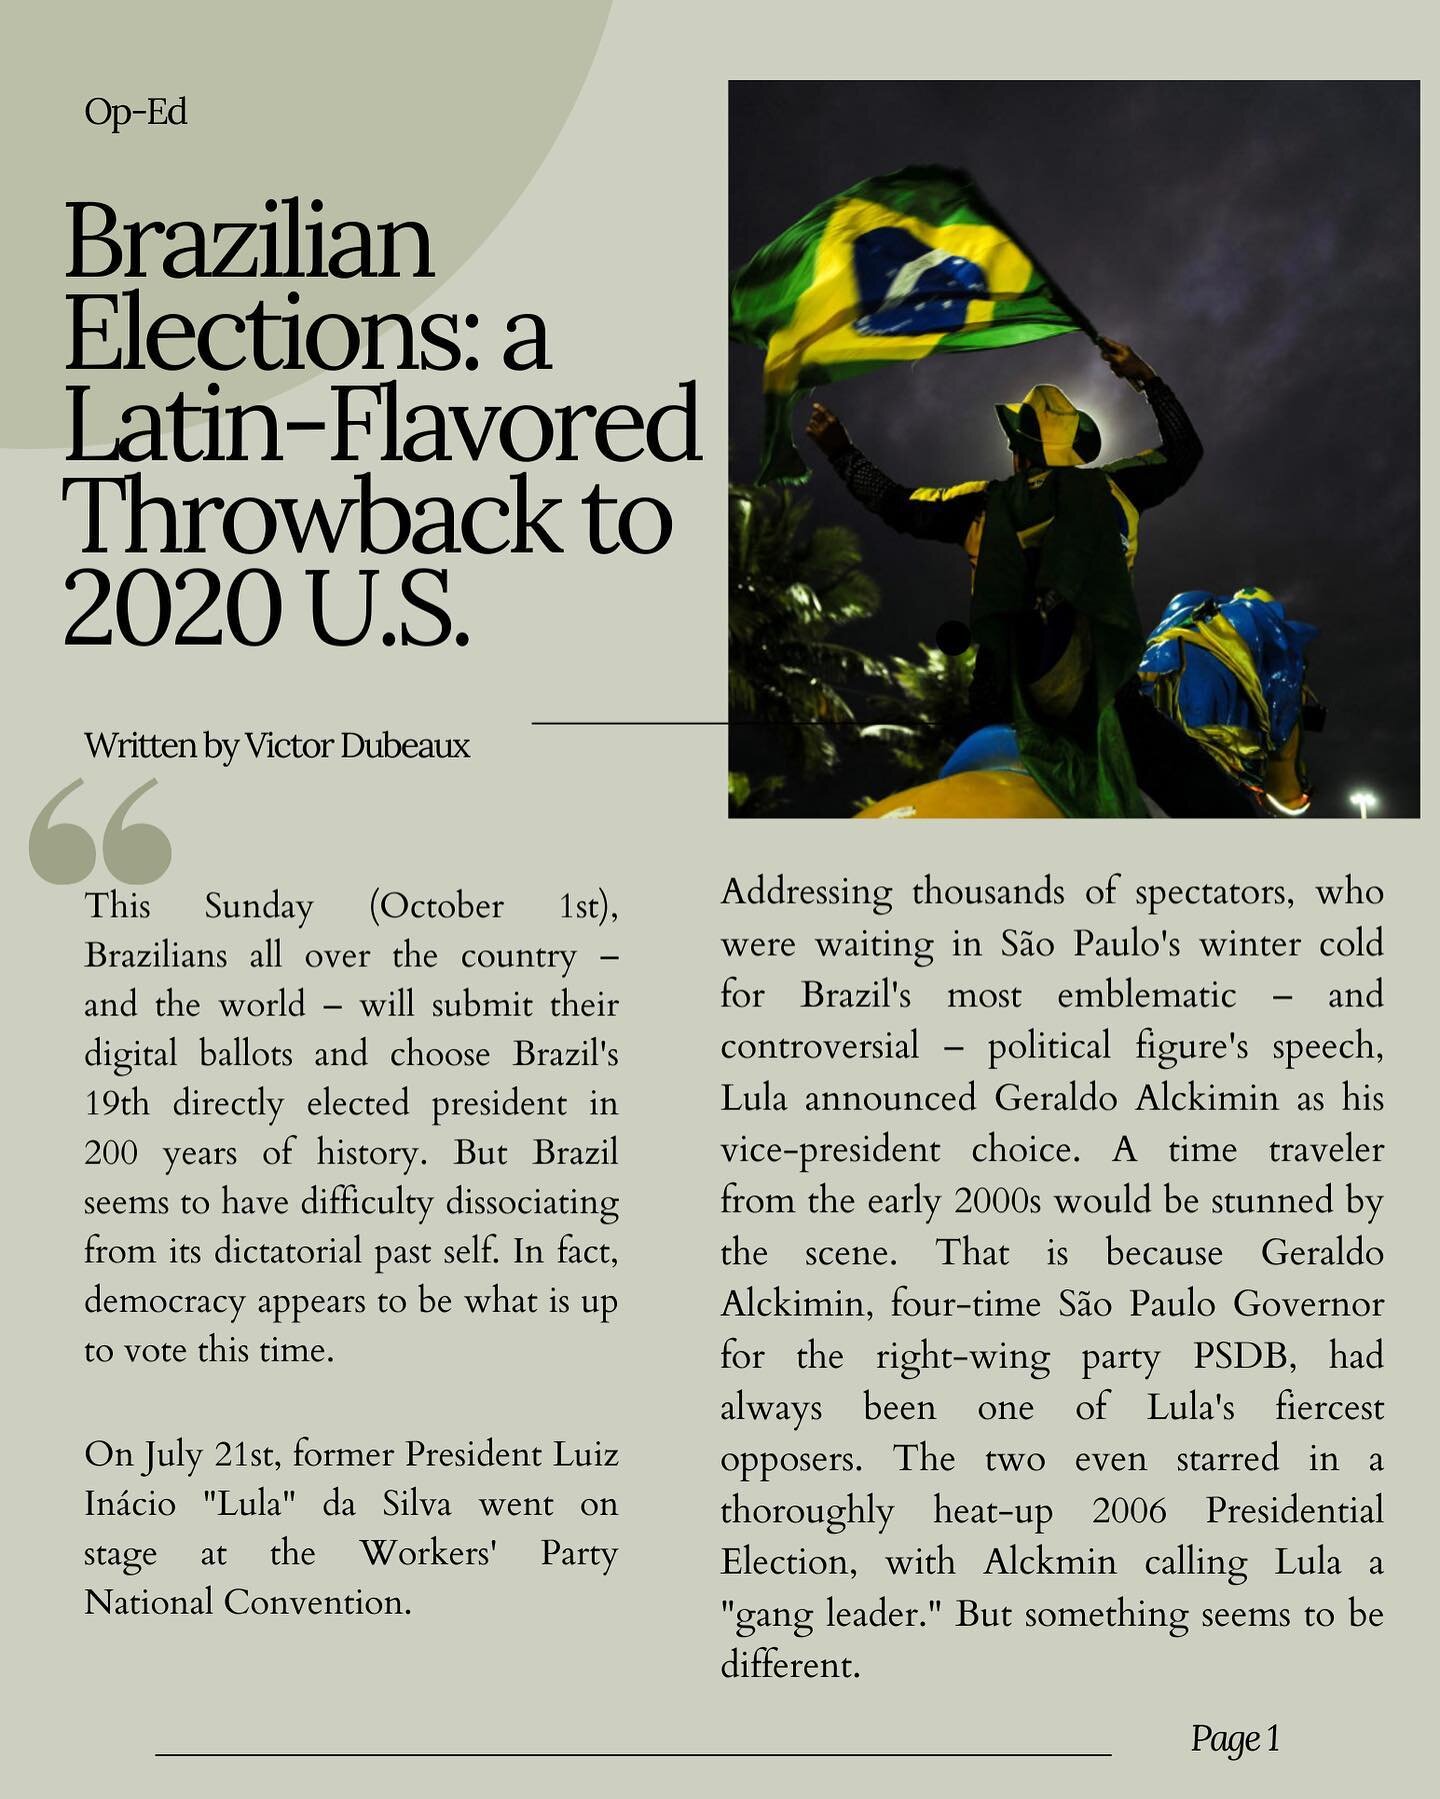 Aaaand we&rsquo;re back! We&rsquo;re so excited to share this month&rsquo;s Op-Ed, which draws a parallel between the 2022 elections in Brazil and the 2020 elections in the U.S, written by Victor Dubeaux. READ!! 💙💙